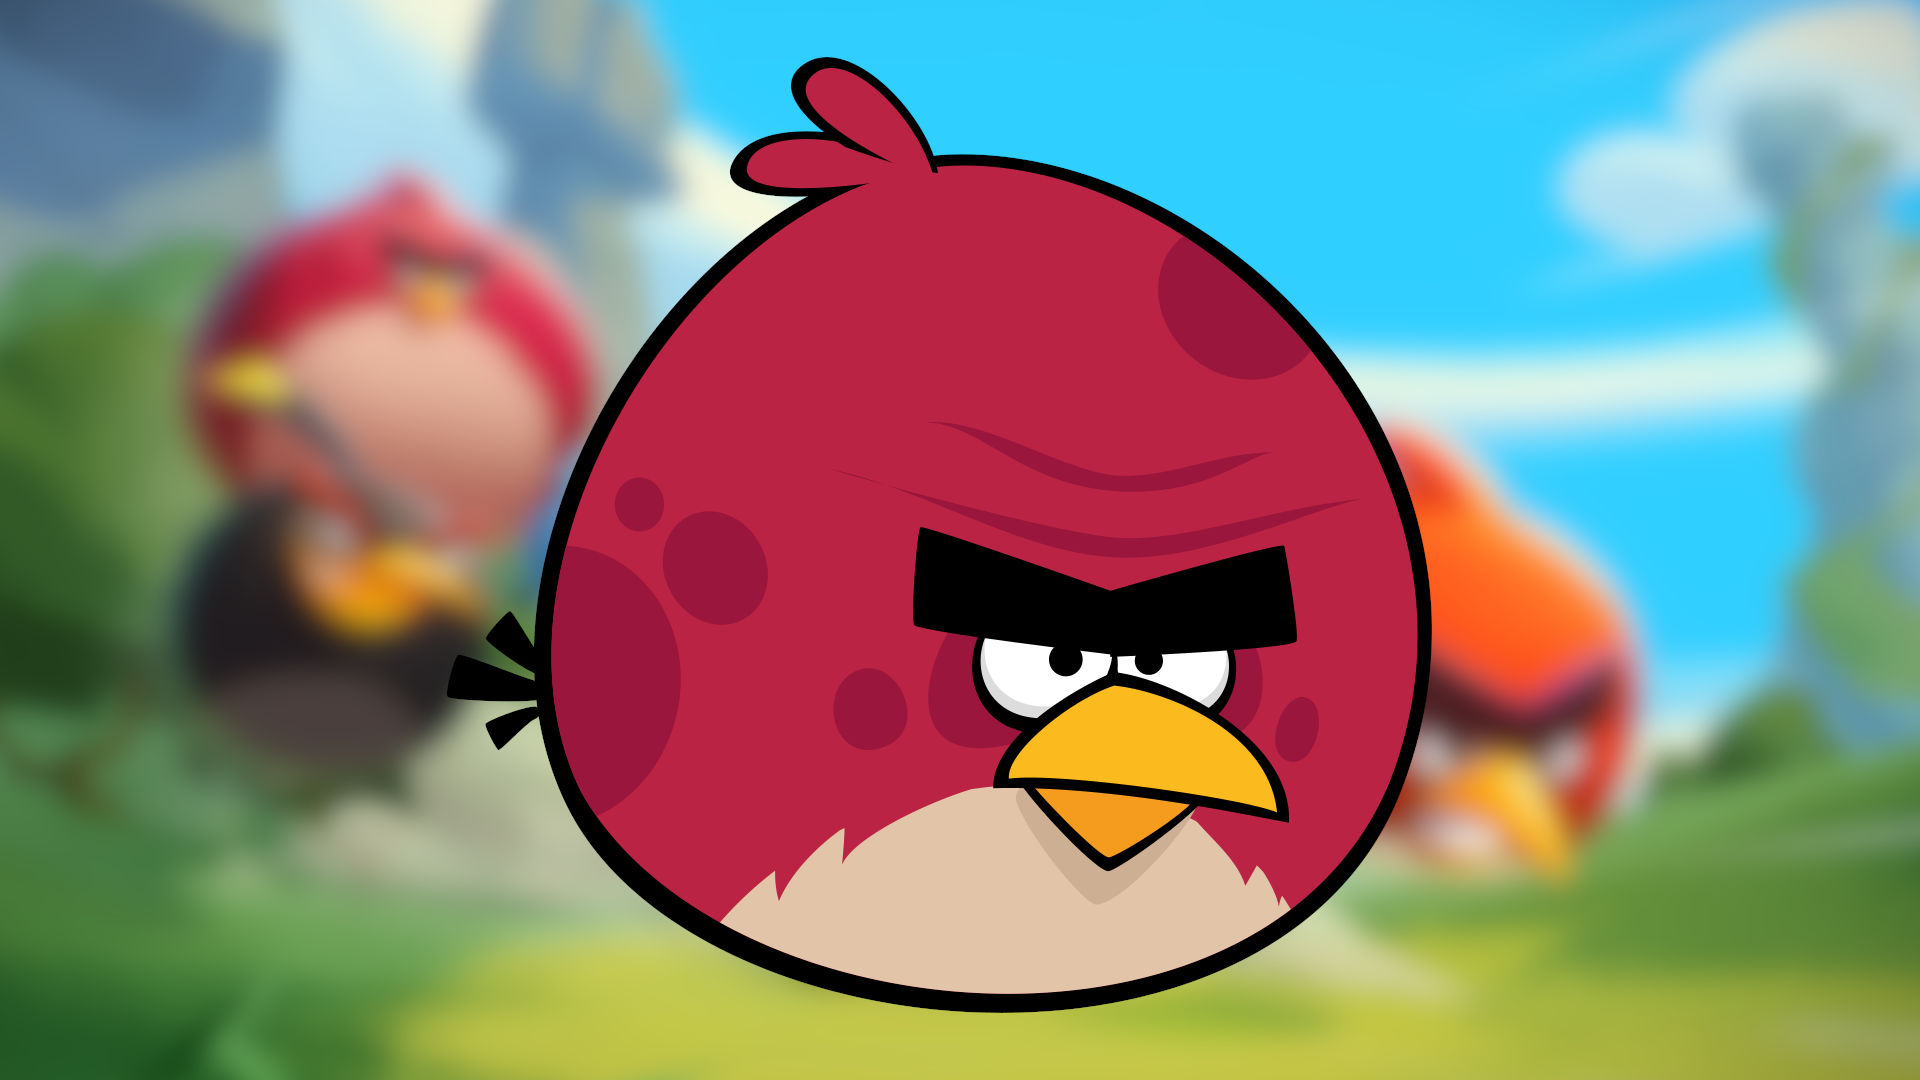 Angry Birds character Terence